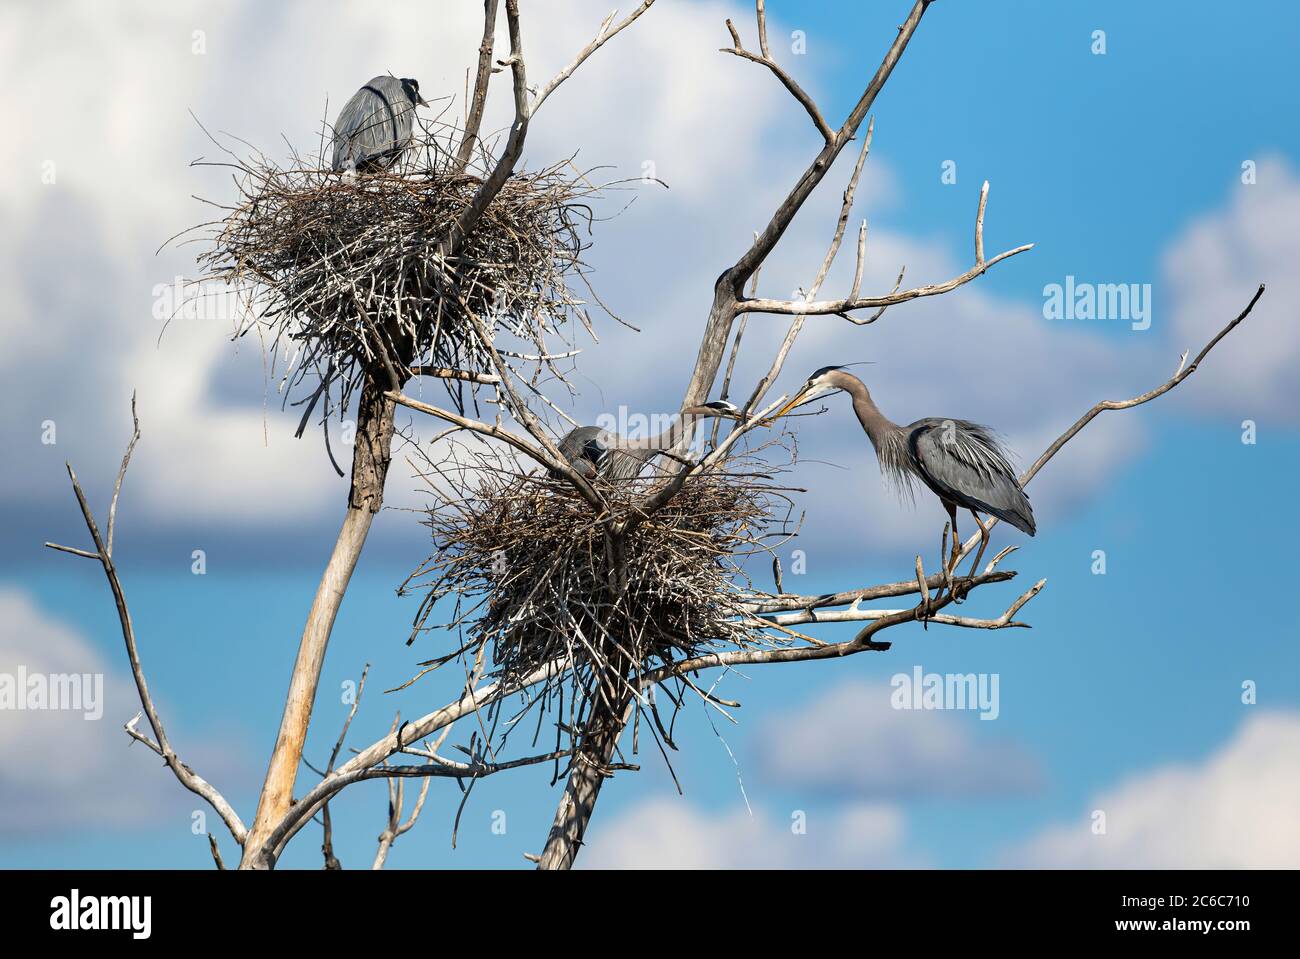 A tall dead tree with two nests shows a Great Blue Heron couple adjusting a stick together against a beautiful backdrop of fluffy clouds and blue sky. Stock Photo